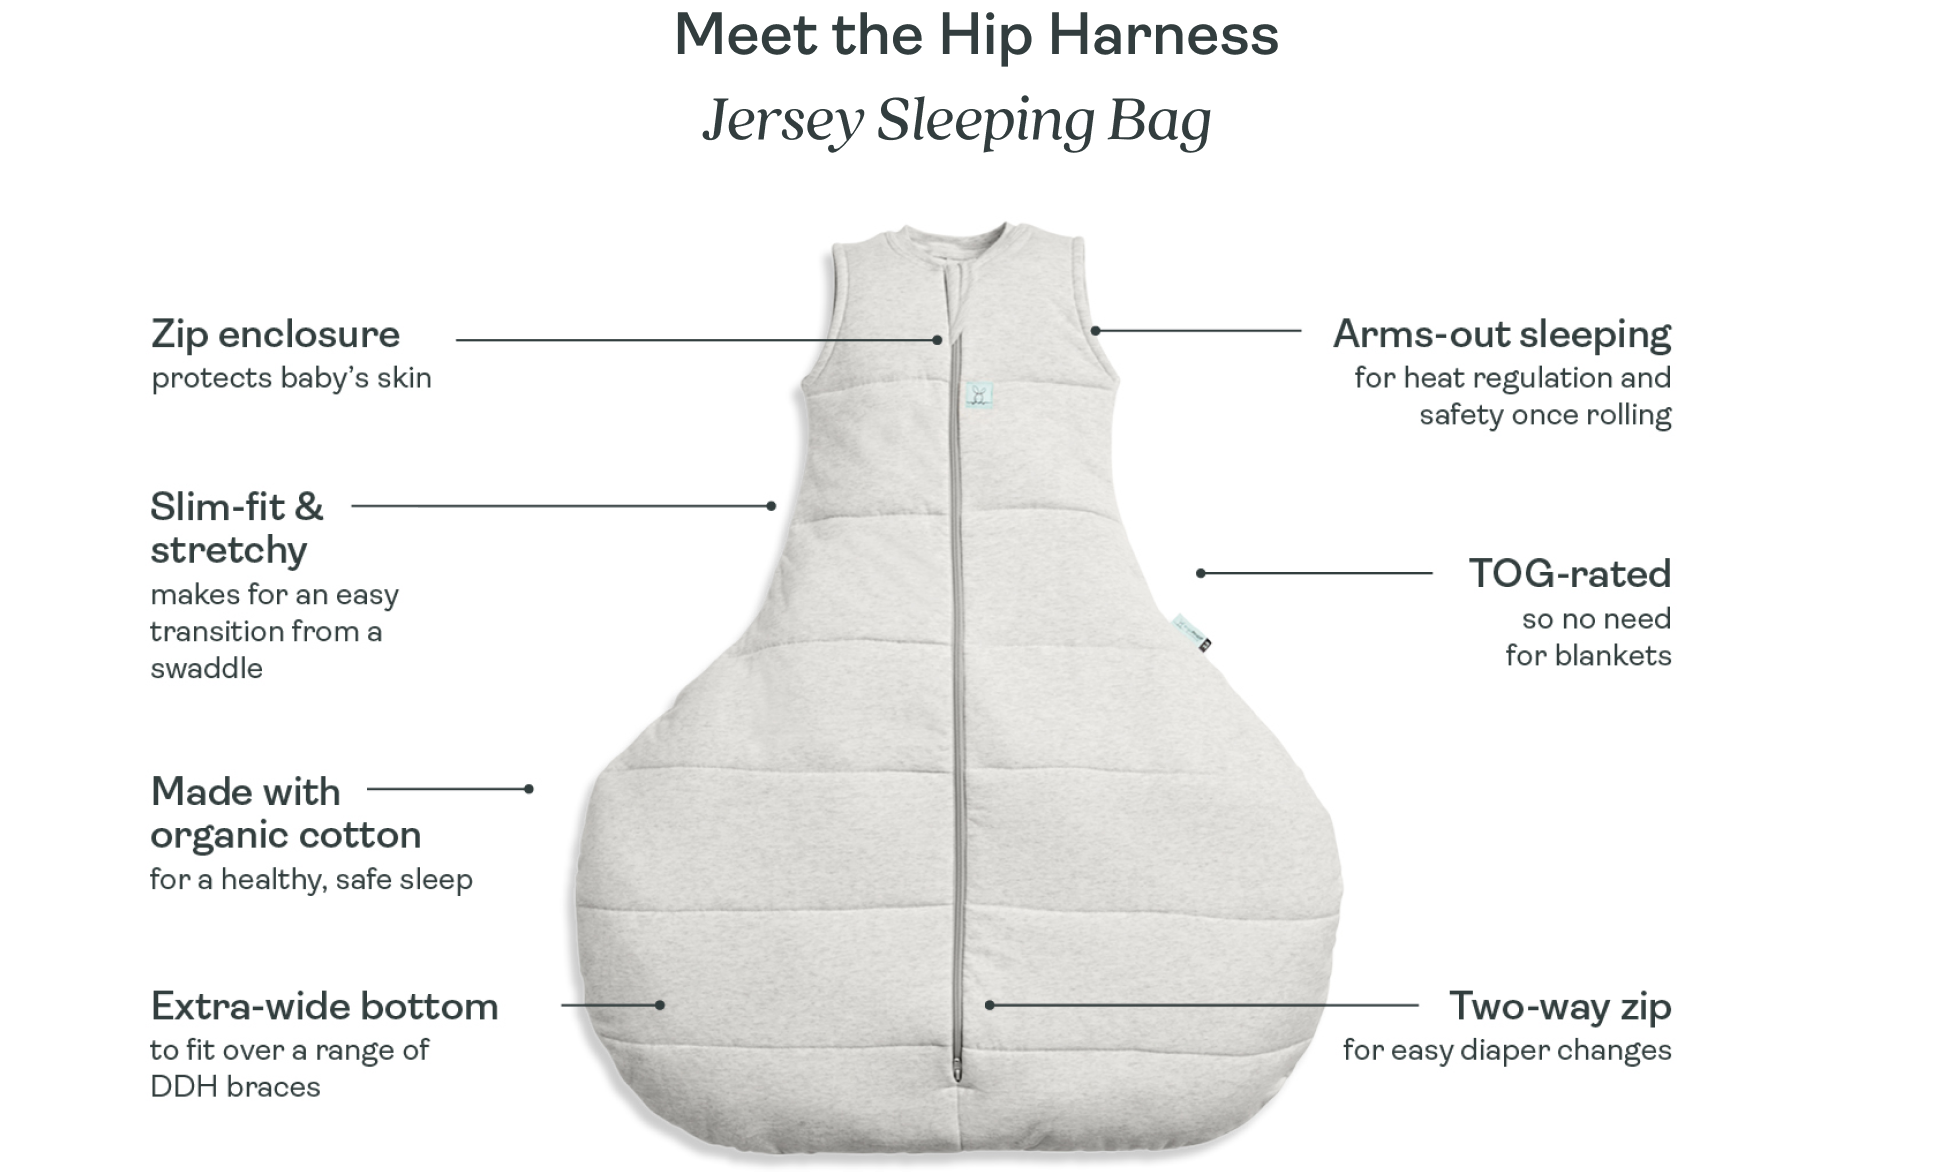 Features of the Hip Harness Jersey Sleeping Bag